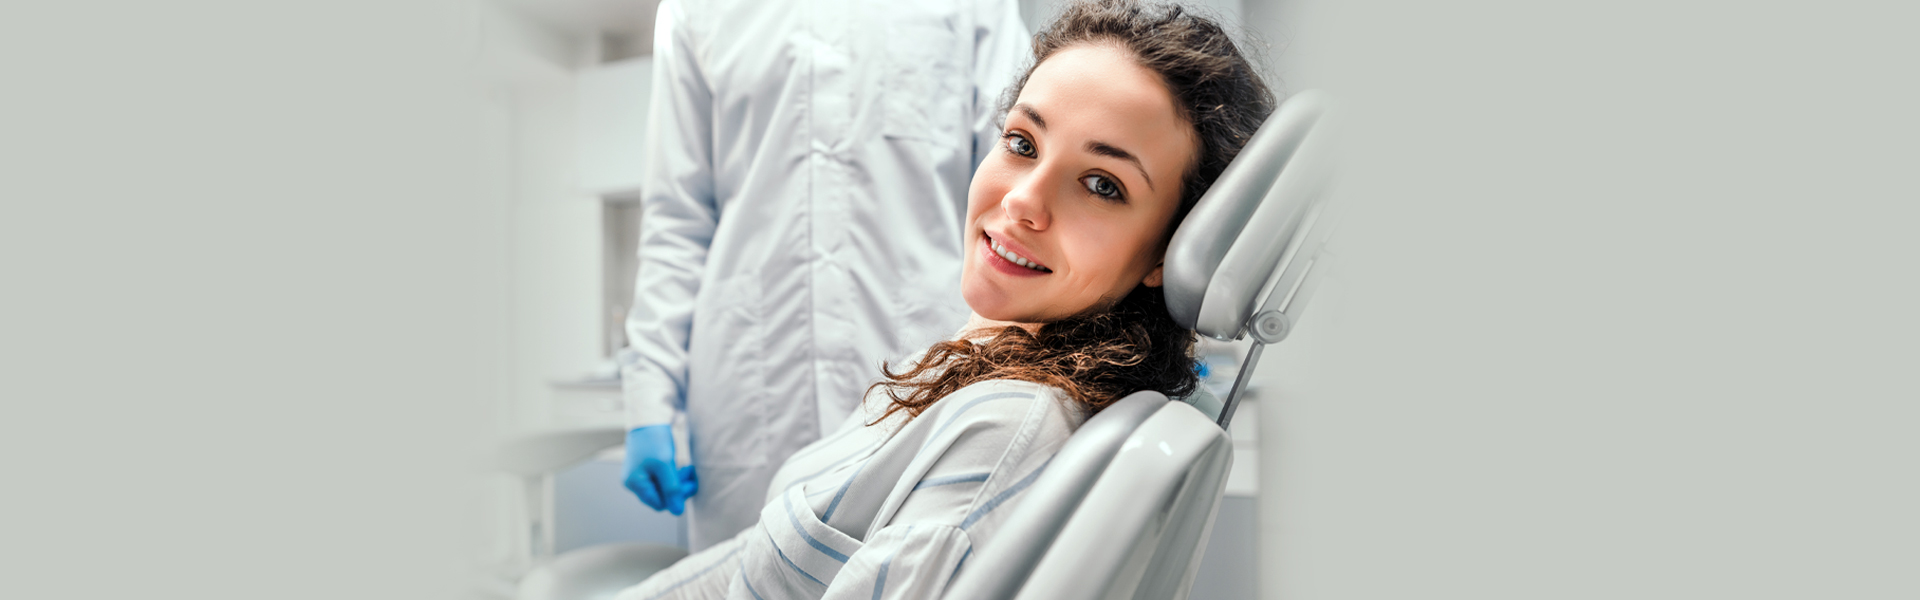 Girl a Brampton dental clinic for Root Canals treatment